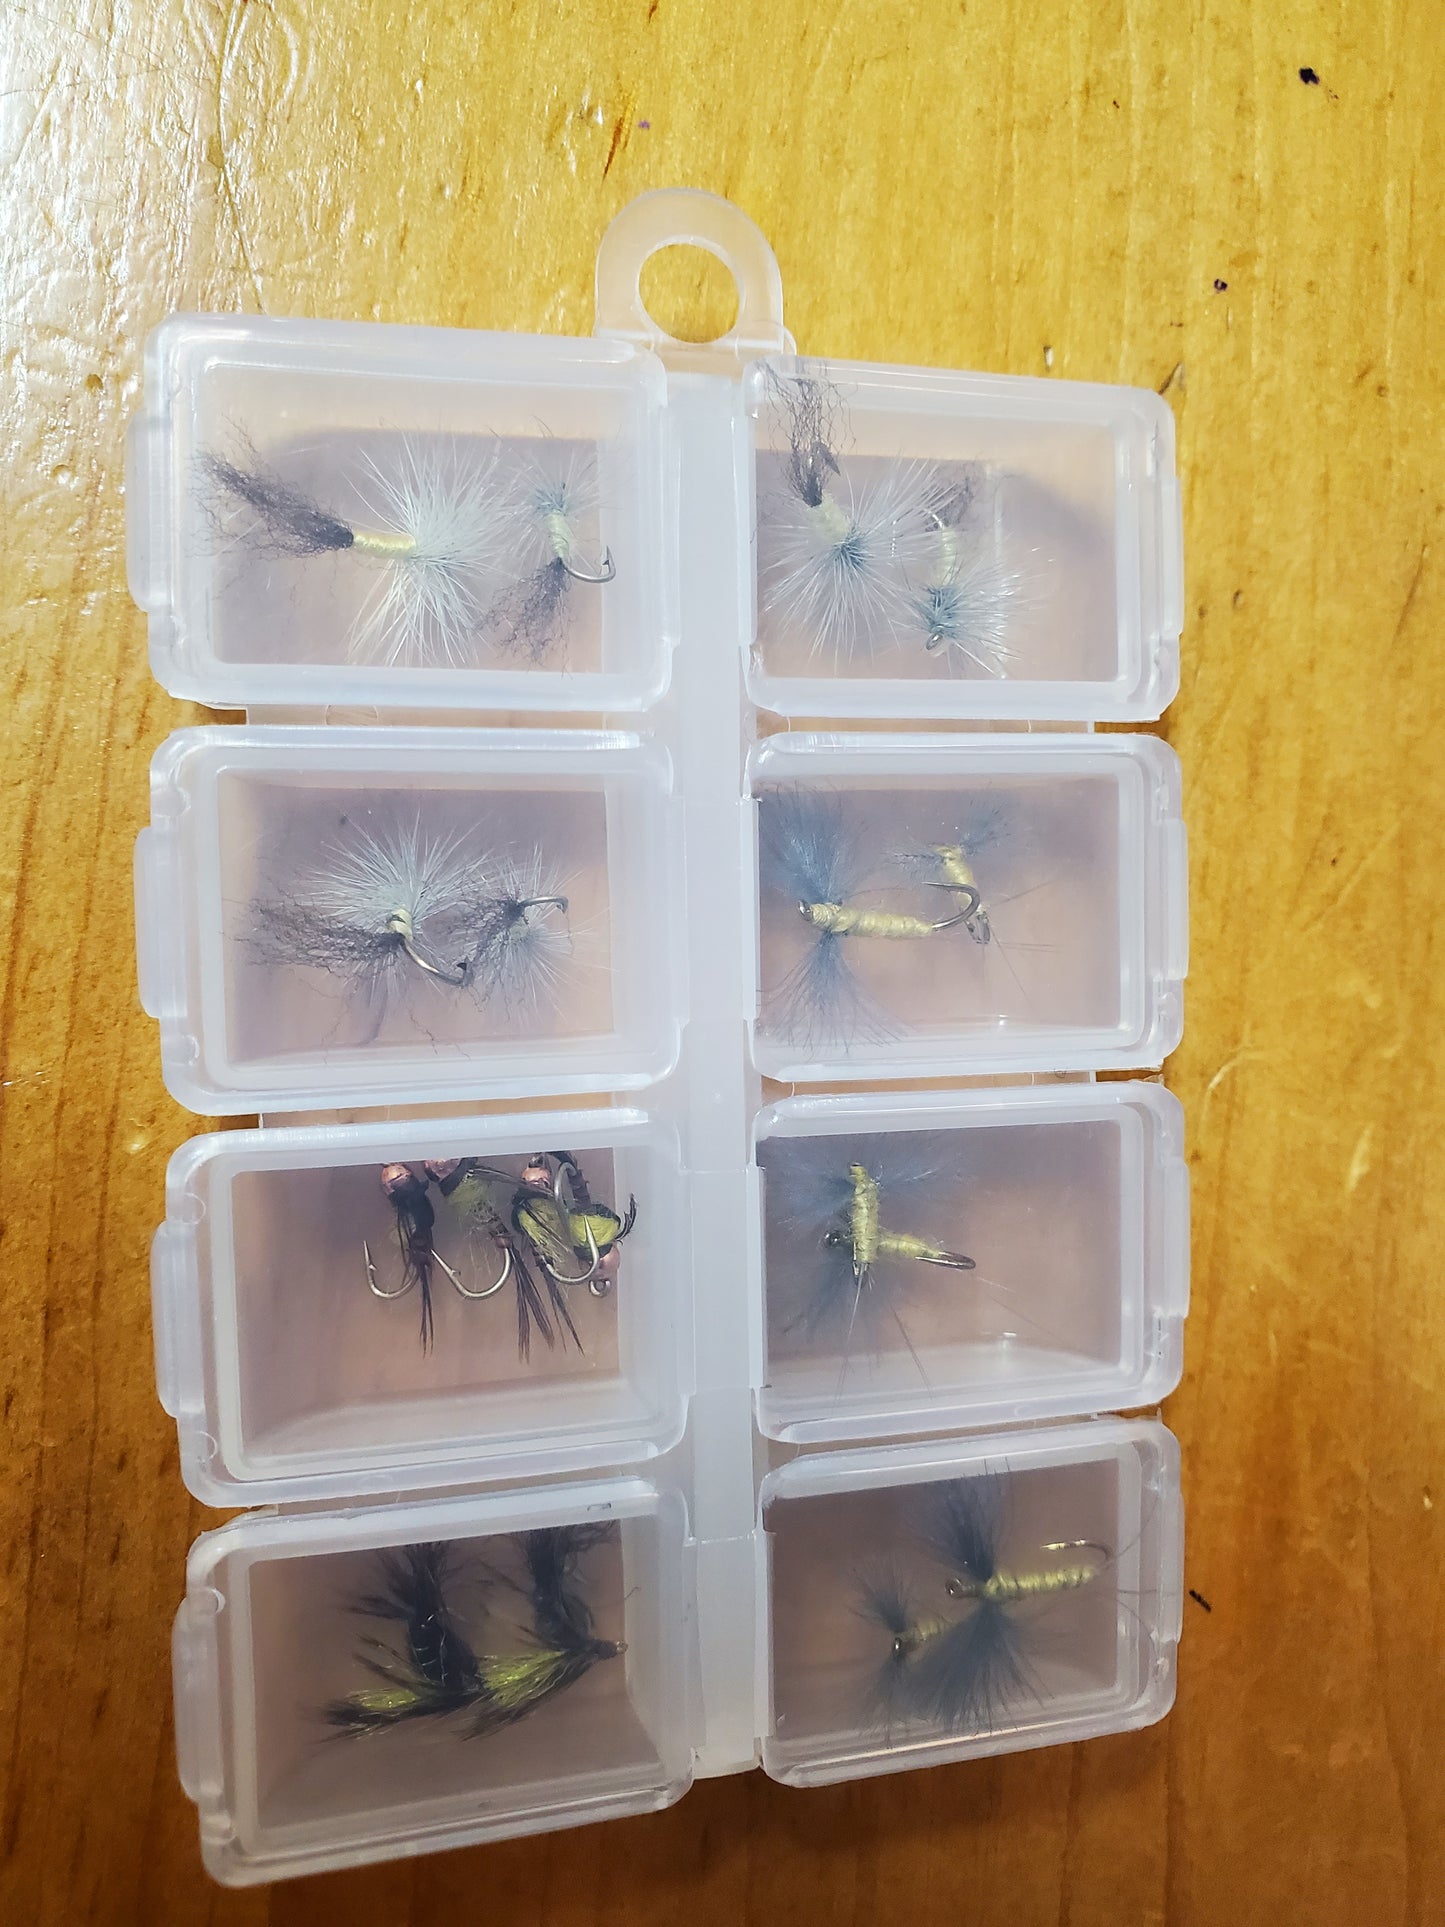 Sulfur Life Cycle Fly Selection, Sulfur Dry Fly, Sulfur Nymph, Sulfur Emerger 16 Flies